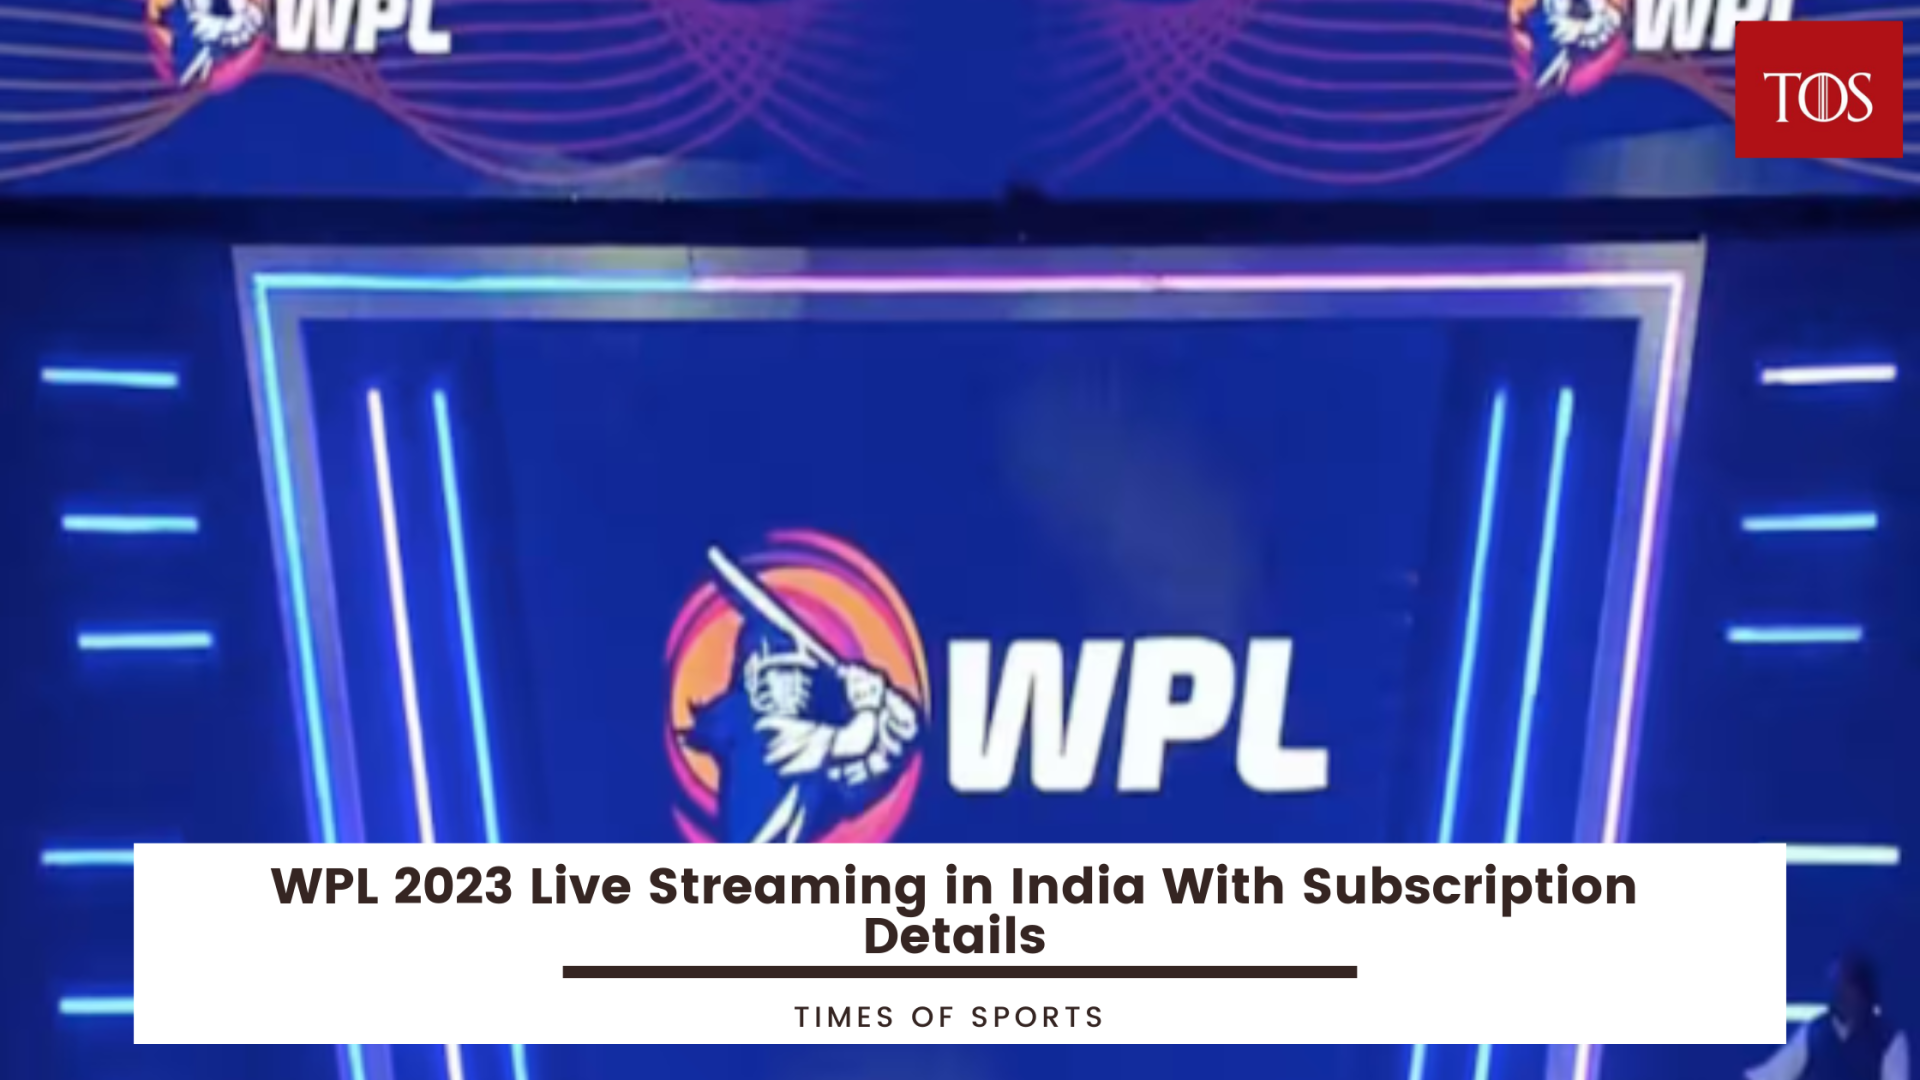 WPL 2023 Live Streaming in India With Subscription Details